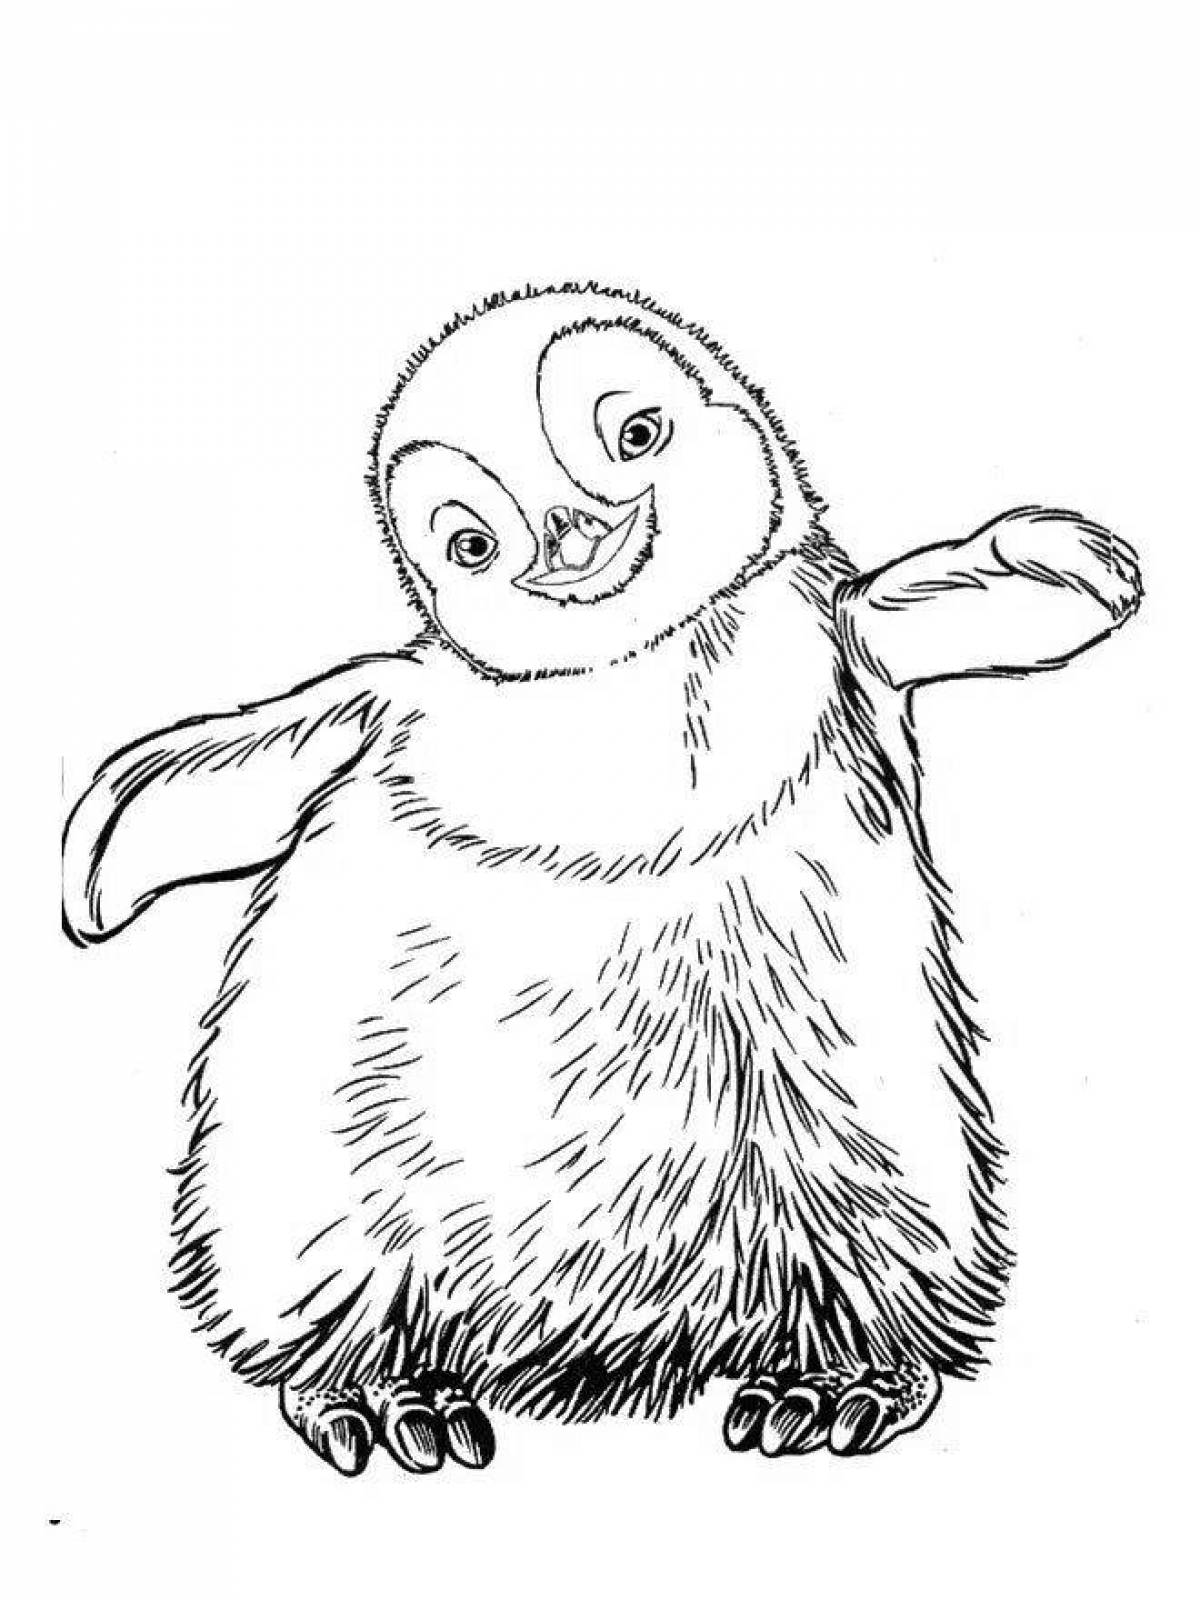 Fun drawing of a penguin for kids